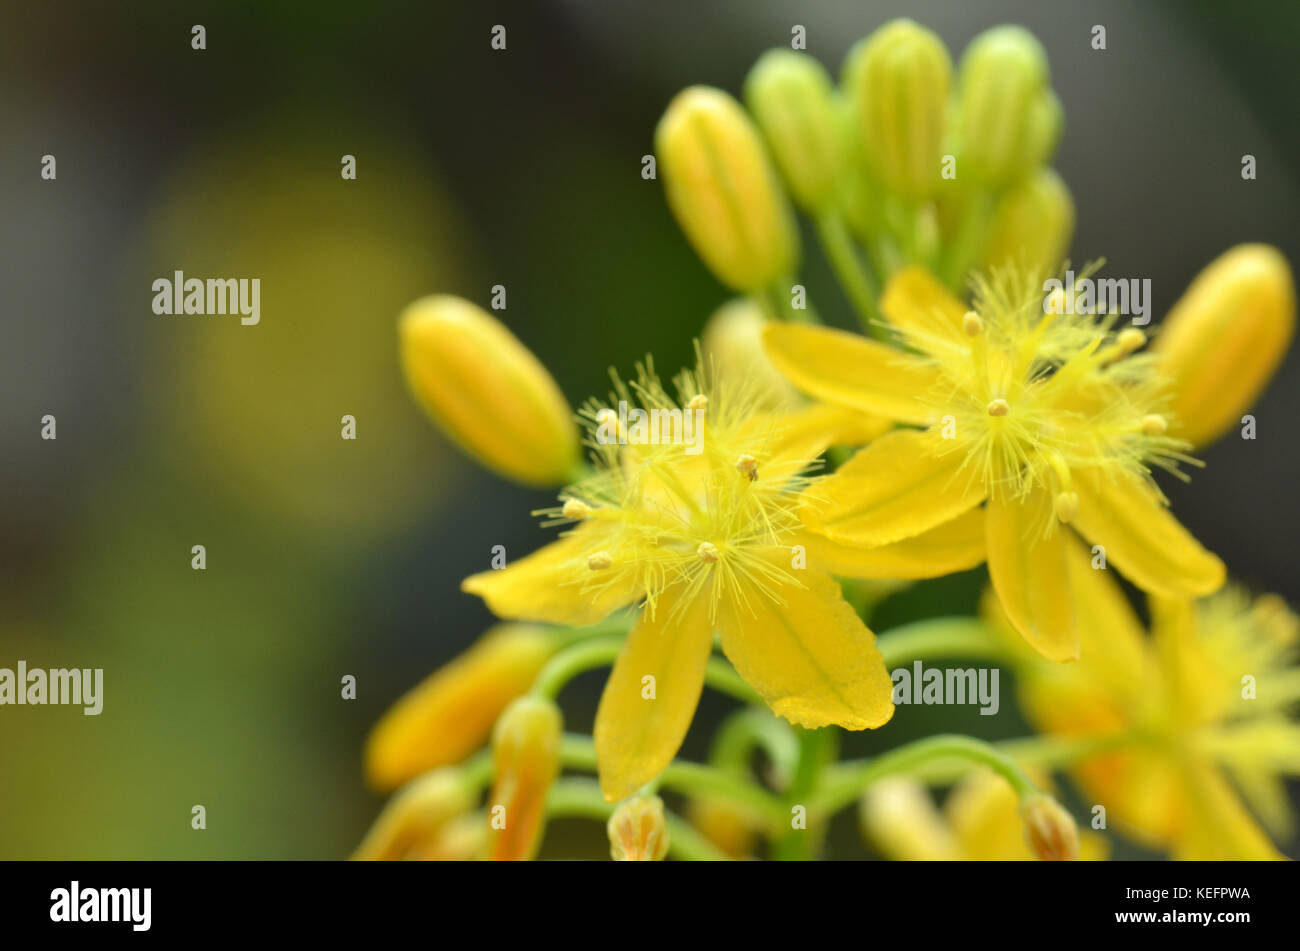 S. African plant Bulbine natalensis also known with common name Bulbine Stock Photo